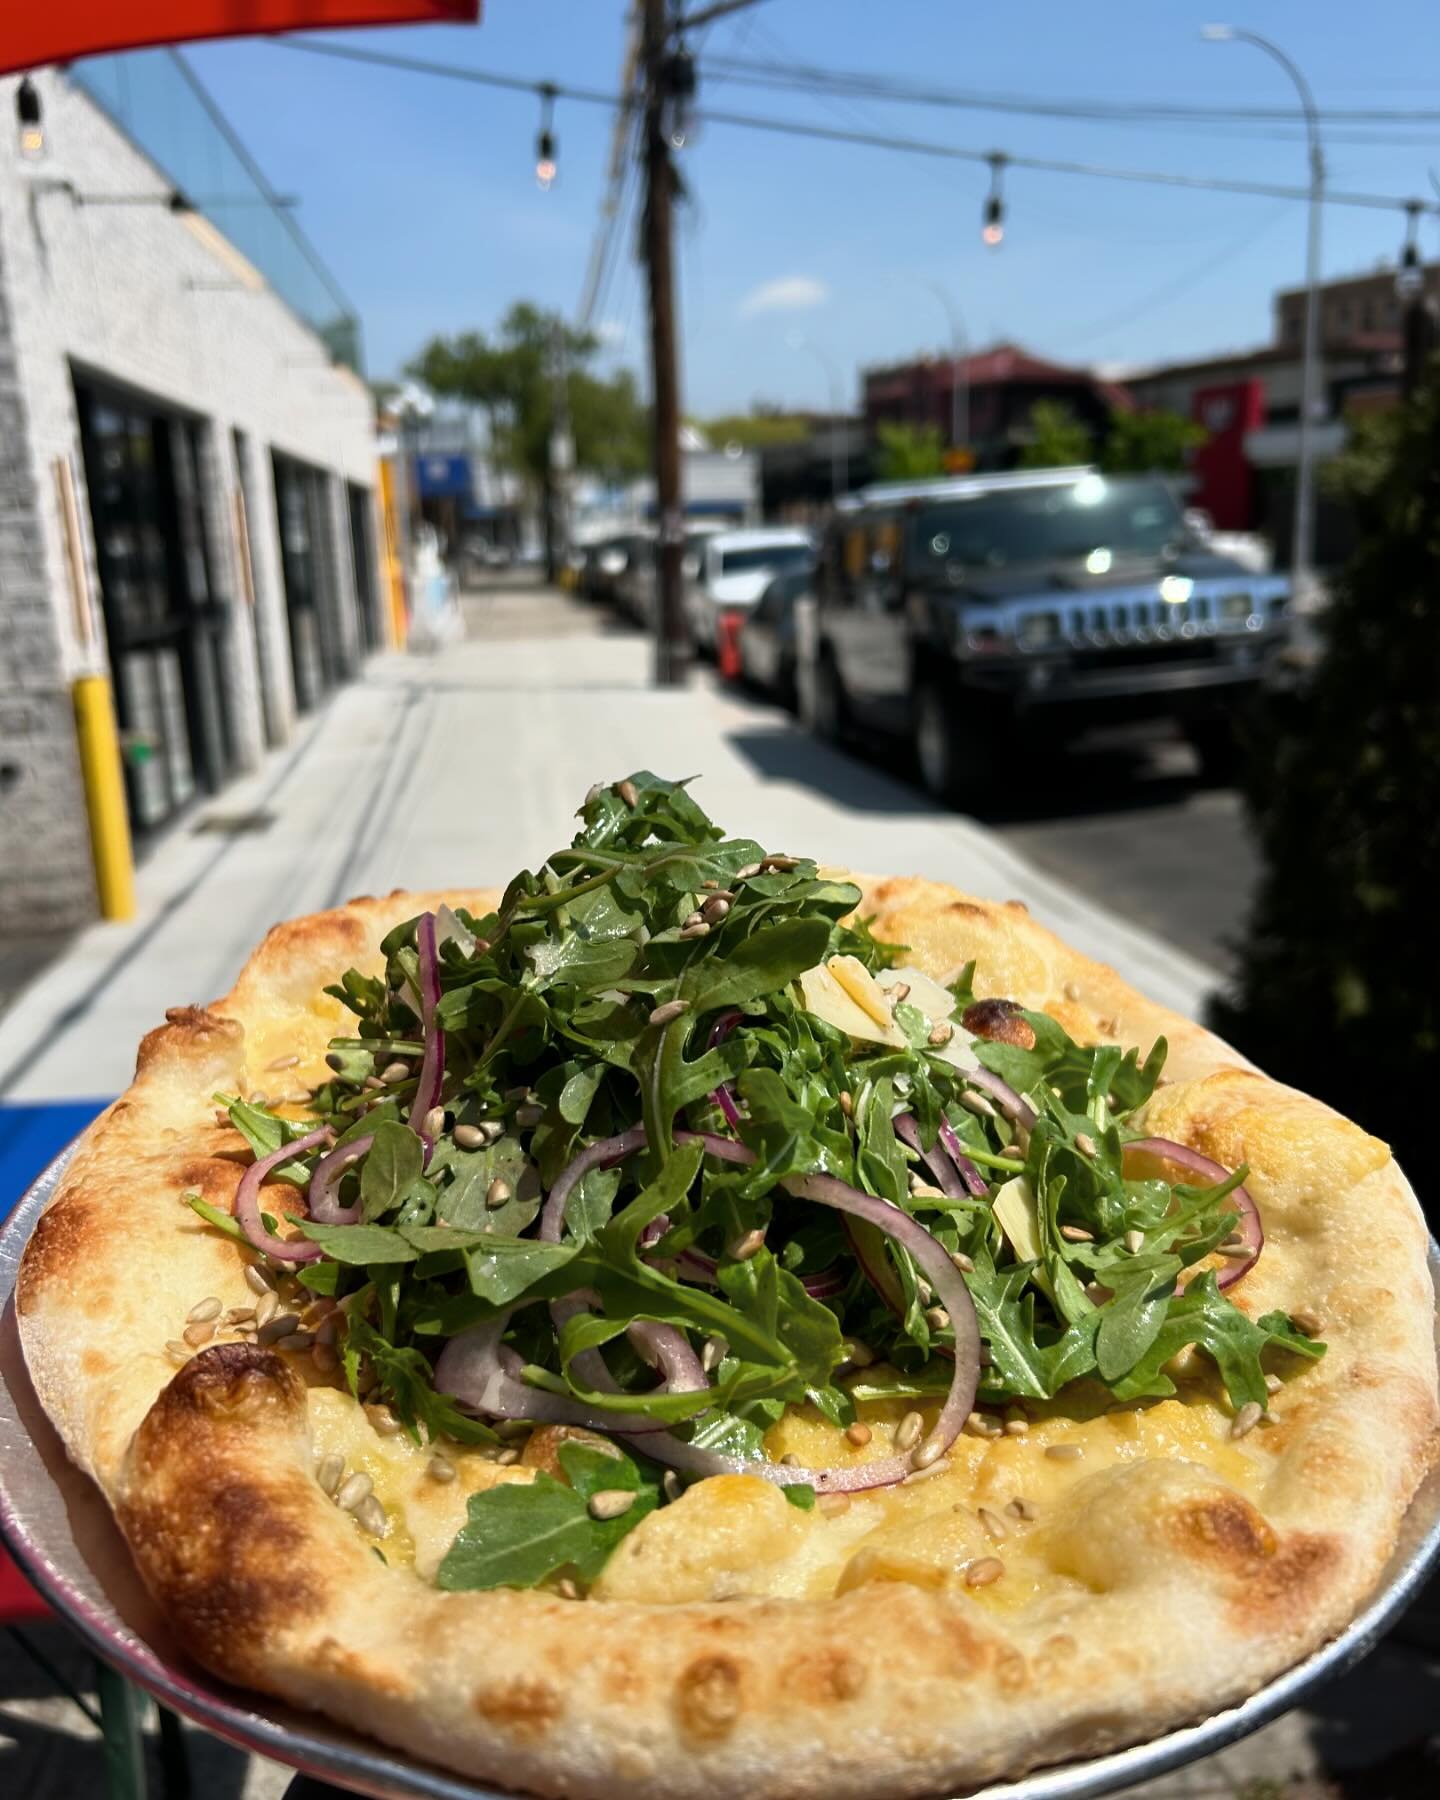 We did it! Perfect Day to top the Pizza with Arugula, Shaved Parmesan, Roasted Sunflower Seeds, Red Onion, Red Wine Vinegar and EVOO!

Get it here today or through our website for delivery. 
#livelyday #bronxpizza #nycpizza #kingsbridgesocialclub